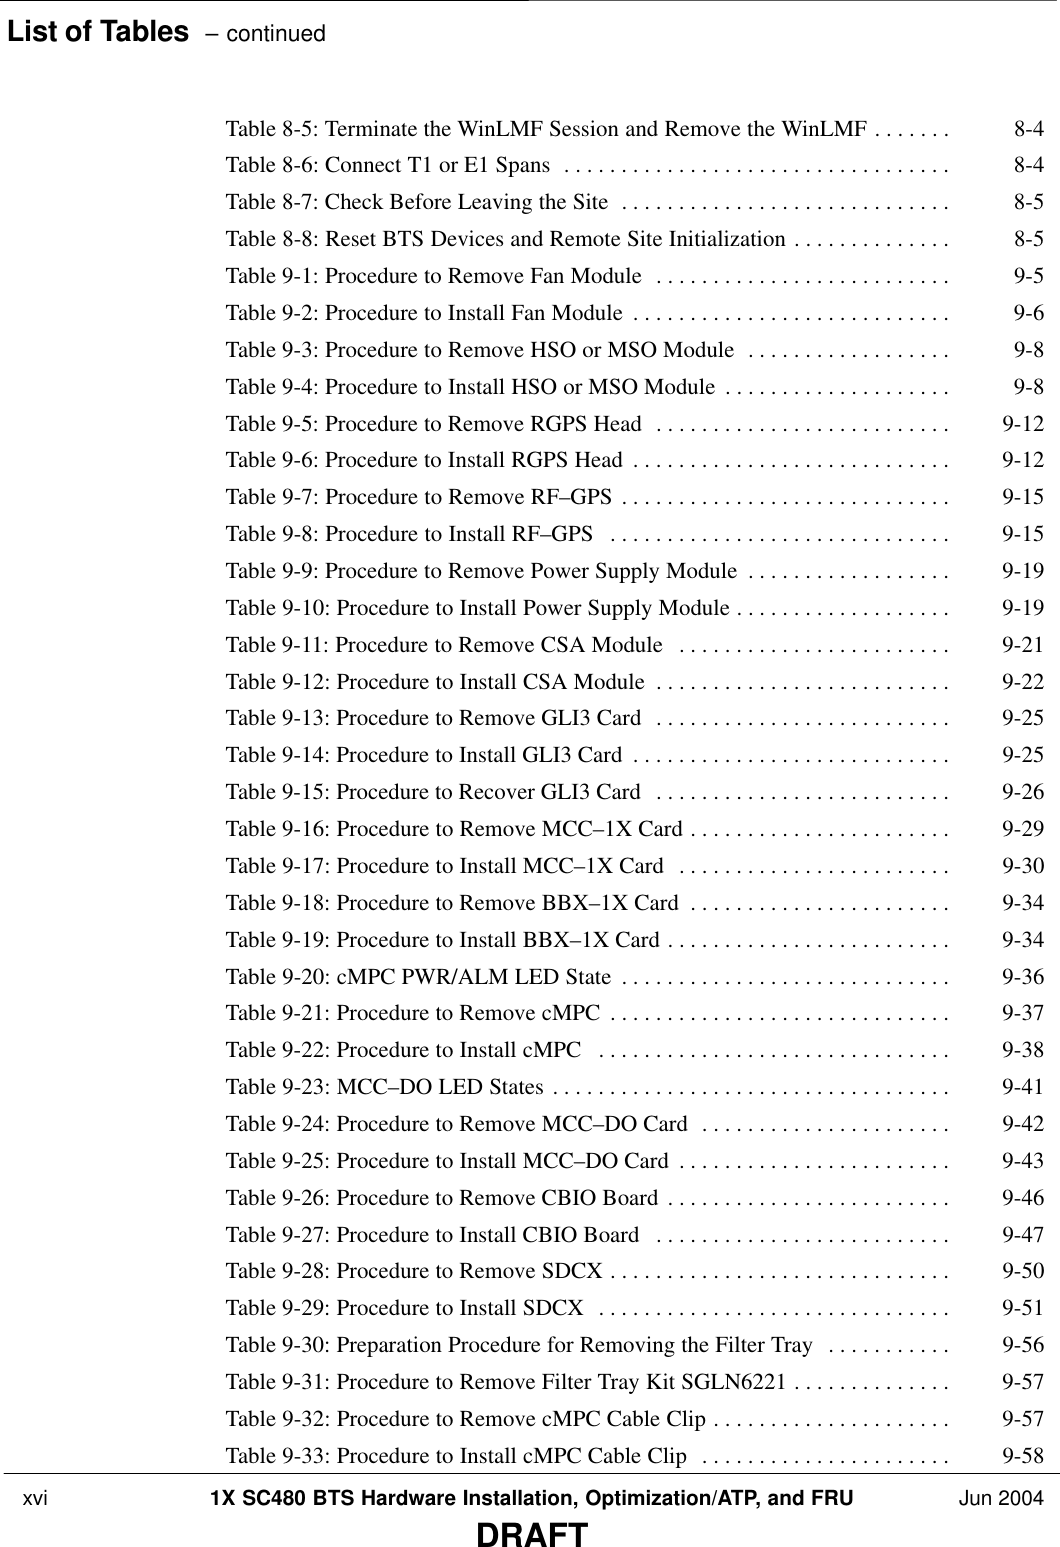 List of Tables  – continued xvi 1X SC480 BTS Hardware Installation, Optimization/ATP, and FRU Jun 2004DRAFTTable 8-5: Terminate the WinLMF Session and Remove the WinLMF 8-4 . . . . . . . Table 8-6: Connect T1 or E1 Spans 8-4 . . . . . . . . . . . . . . . . . . . . . . . . . . . . . . . . . . Table 8-7: Check Before Leaving the Site 8-5 . . . . . . . . . . . . . . . . . . . . . . . . . . . . . Table 8-8: Reset BTS Devices and Remote Site Initialization 8-5 . . . . . . . . . . . . . . Table 9-1: Procedure to Remove Fan Module 9-5 . . . . . . . . . . . . . . . . . . . . . . . . . . Table 9-2: Procedure to Install Fan Module 9-6 . . . . . . . . . . . . . . . . . . . . . . . . . . . . Table 9-3: Procedure to Remove HSO or MSO Module 9-8 . . . . . . . . . . . . . . . . . . Table 9-4: Procedure to Install HSO or MSO Module 9-8 . . . . . . . . . . . . . . . . . . . . Table 9-5: Procedure to Remove RGPS Head 9-12 . . . . . . . . . . . . . . . . . . . . . . . . . . Table 9-6: Procedure to Install RGPS Head 9-12 . . . . . . . . . . . . . . . . . . . . . . . . . . . . Table 9-7: Procedure to Remove RF–GPS 9-15 . . . . . . . . . . . . . . . . . . . . . . . . . . . . . Table 9-8: Procedure to Install RF–GPS 9-15 . . . . . . . . . . . . . . . . . . . . . . . . . . . . . . Table 9-9: Procedure to Remove Power Supply Module 9-19 . . . . . . . . . . . . . . . . . . Table 9-10: Procedure to Install Power Supply Module 9-19 . . . . . . . . . . . . . . . . . . . Table 9-11: Procedure to Remove CSA Module 9-21 . . . . . . . . . . . . . . . . . . . . . . . . Table 9-12: Procedure to Install CSA Module 9-22 . . . . . . . . . . . . . . . . . . . . . . . . . . Table 9-13: Procedure to Remove GLI3 Card 9-25 . . . . . . . . . . . . . . . . . . . . . . . . . . Table 9-14: Procedure to Install GLI3 Card 9-25 . . . . . . . . . . . . . . . . . . . . . . . . . . . . Table 9-15: Procedure to Recover GLI3 Card 9-26 . . . . . . . . . . . . . . . . . . . . . . . . . . Table 9-16: Procedure to Remove MCC–1X Card 9-29 . . . . . . . . . . . . . . . . . . . . . . . Table 9-17: Procedure to Install MCC–1X Card 9-30 . . . . . . . . . . . . . . . . . . . . . . . . Table 9-18: Procedure to Remove BBX–1X Card 9-34 . . . . . . . . . . . . . . . . . . . . . . . Table 9-19: Procedure to Install BBX–1X Card 9-34 . . . . . . . . . . . . . . . . . . . . . . . . . Table 9-20: cMPC PWR/ALM LED State 9-36 . . . . . . . . . . . . . . . . . . . . . . . . . . . . . Table 9-21: Procedure to Remove cMPC 9-37 . . . . . . . . . . . . . . . . . . . . . . . . . . . . . . Table 9-22: Procedure to Install cMPC 9-38 . . . . . . . . . . . . . . . . . . . . . . . . . . . . . . . Table 9-23: MCC–DO LED States 9-41 . . . . . . . . . . . . . . . . . . . . . . . . . . . . . . . . . . . Table 9-24: Procedure to Remove MCC–DO Card 9-42 . . . . . . . . . . . . . . . . . . . . . . Table 9-25: Procedure to Install MCC–DO Card 9-43 . . . . . . . . . . . . . . . . . . . . . . . . Table 9-26: Procedure to Remove CBIO Board 9-46 . . . . . . . . . . . . . . . . . . . . . . . . . Table 9-27: Procedure to Install CBIO Board 9-47 . . . . . . . . . . . . . . . . . . . . . . . . . . Table 9-28: Procedure to Remove SDCX 9-50 . . . . . . . . . . . . . . . . . . . . . . . . . . . . . . Table 9-29: Procedure to Install SDCX 9-51 . . . . . . . . . . . . . . . . . . . . . . . . . . . . . . . Table 9-30: Preparation Procedure for Removing the Filter Tray 9-56 . . . . . . . . . . . Table 9-31: Procedure to Remove Filter Tray Kit SGLN6221 9-57 . . . . . . . . . . . . . . Table 9-32: Procedure to Remove cMPC Cable Clip 9-57 . . . . . . . . . . . . . . . . . . . . . Table 9-33: Procedure to Install cMPC Cable Clip 9-58 . . . . . . . . . . . . . . . . . . . . . . 